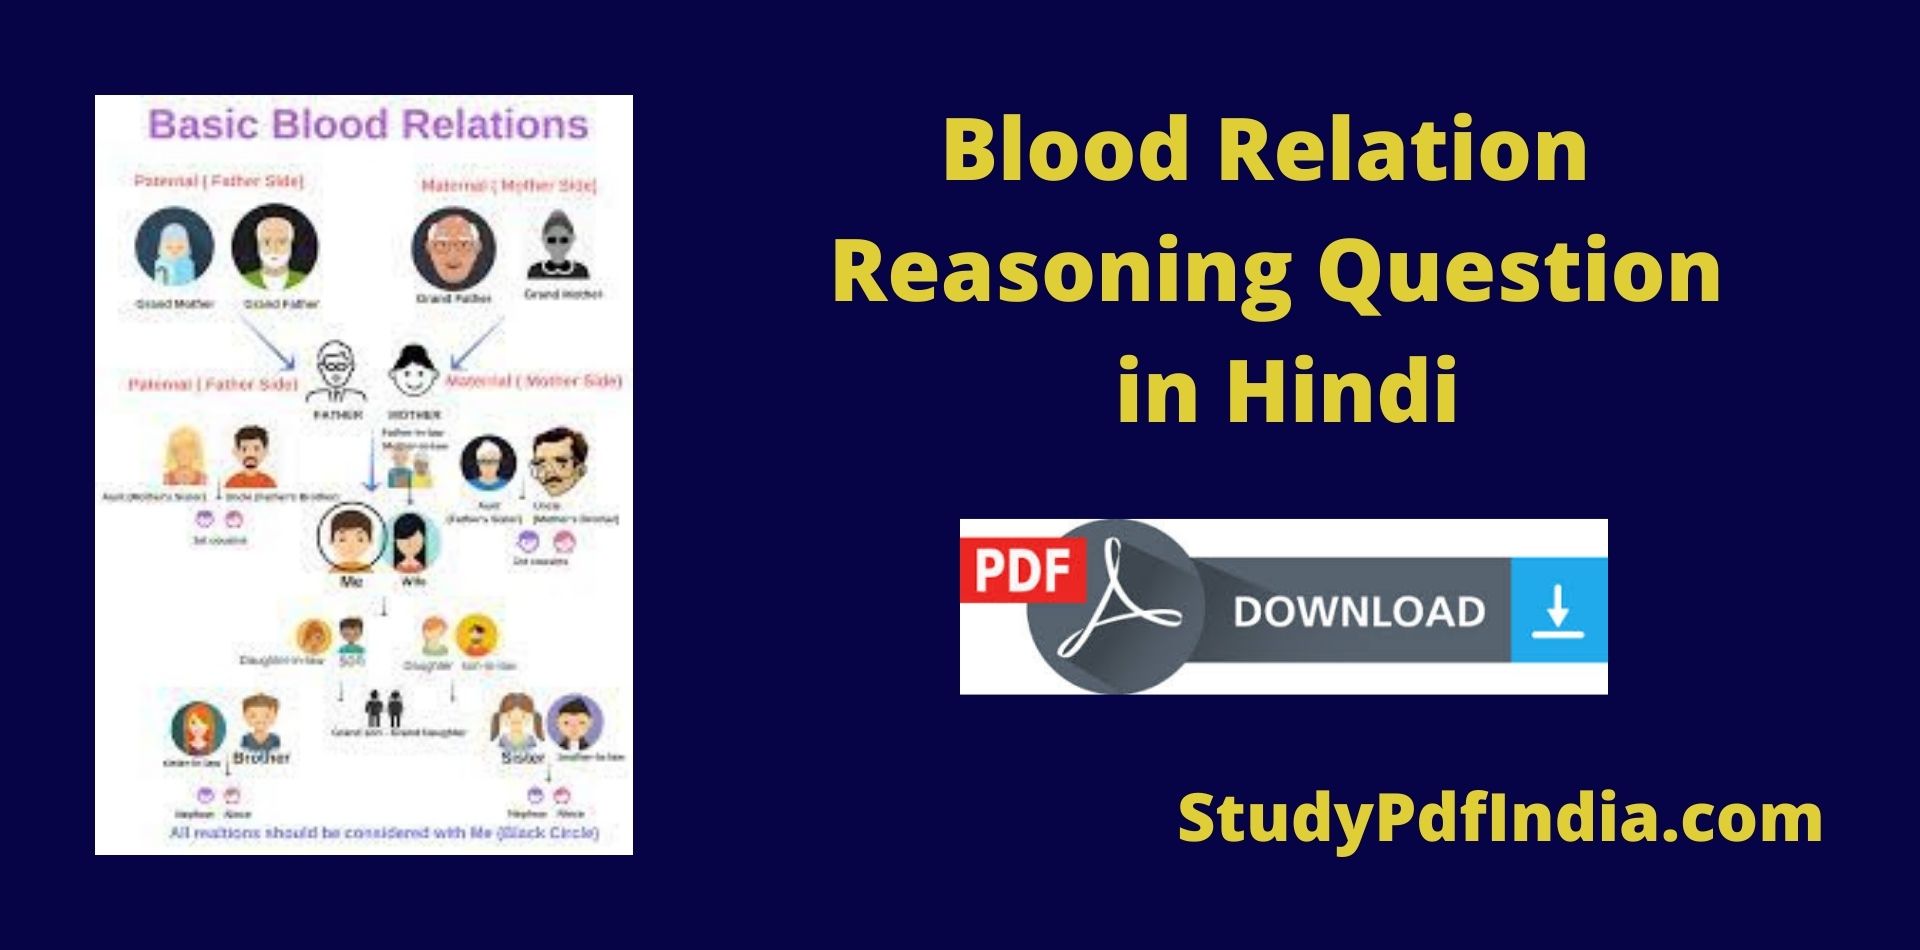 Blood Relation Reasoning Question PDF Download in Hindi